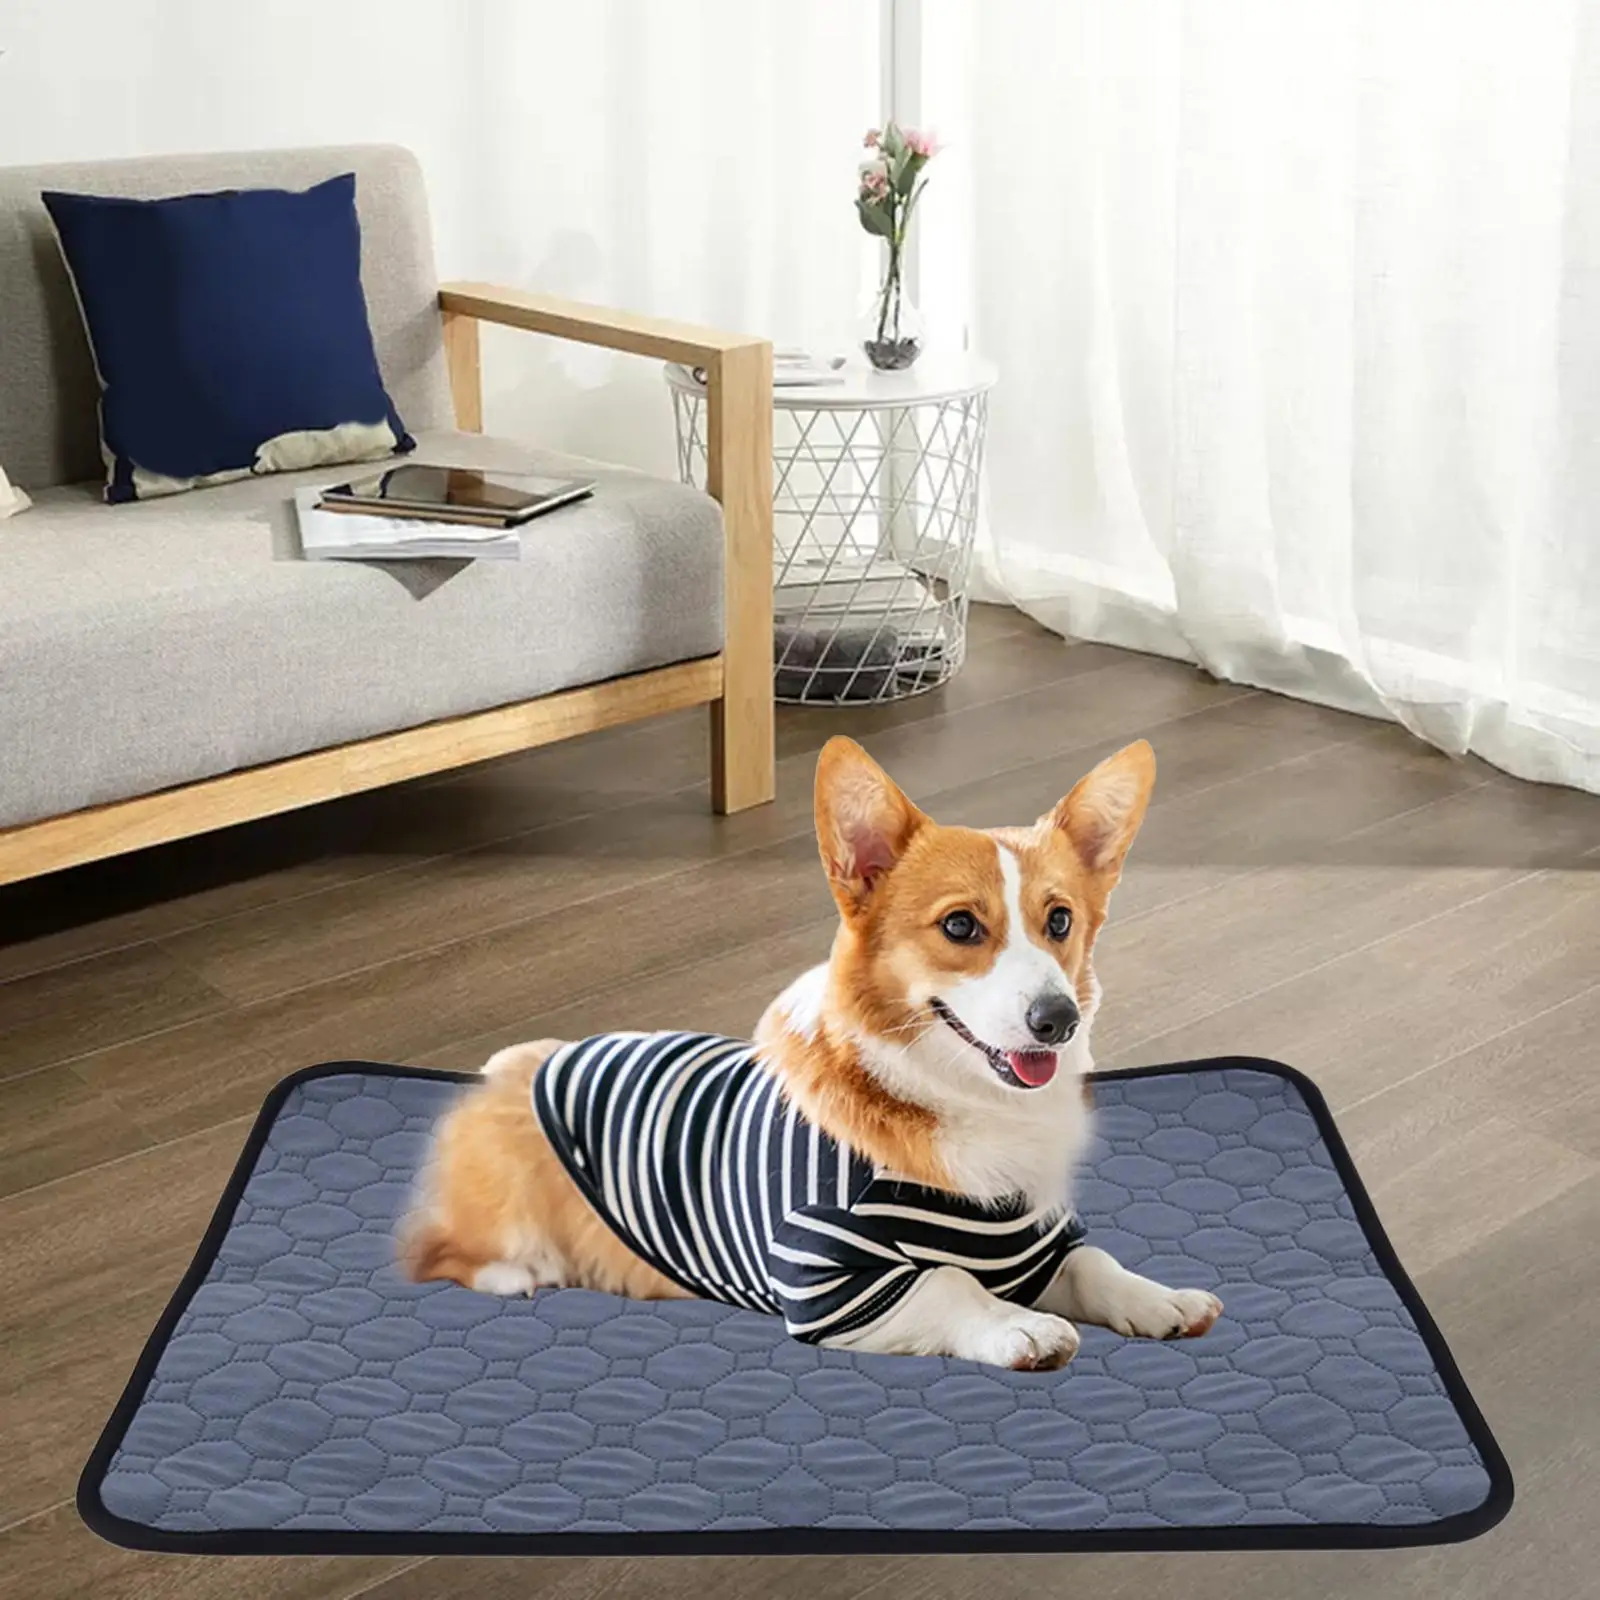 Pee Pad Urine Mat Reusable Breathable for Hotel Travel Pet Incontinence